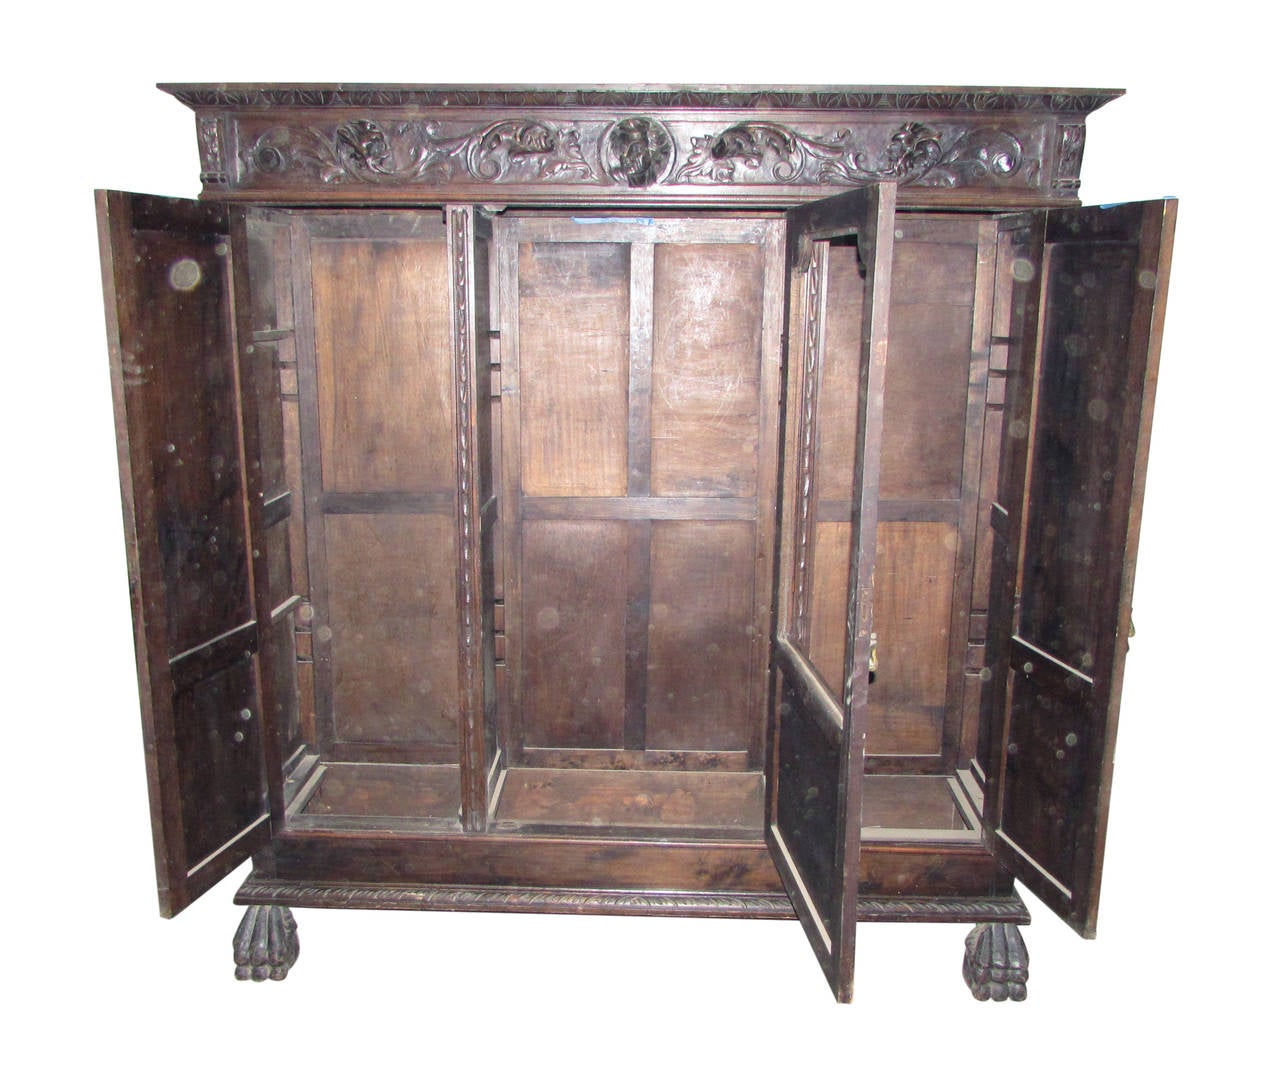 Late 19th Century 1880s Hand-Carved Figural Cabinet with Claw Feet, Faces and Interior Light